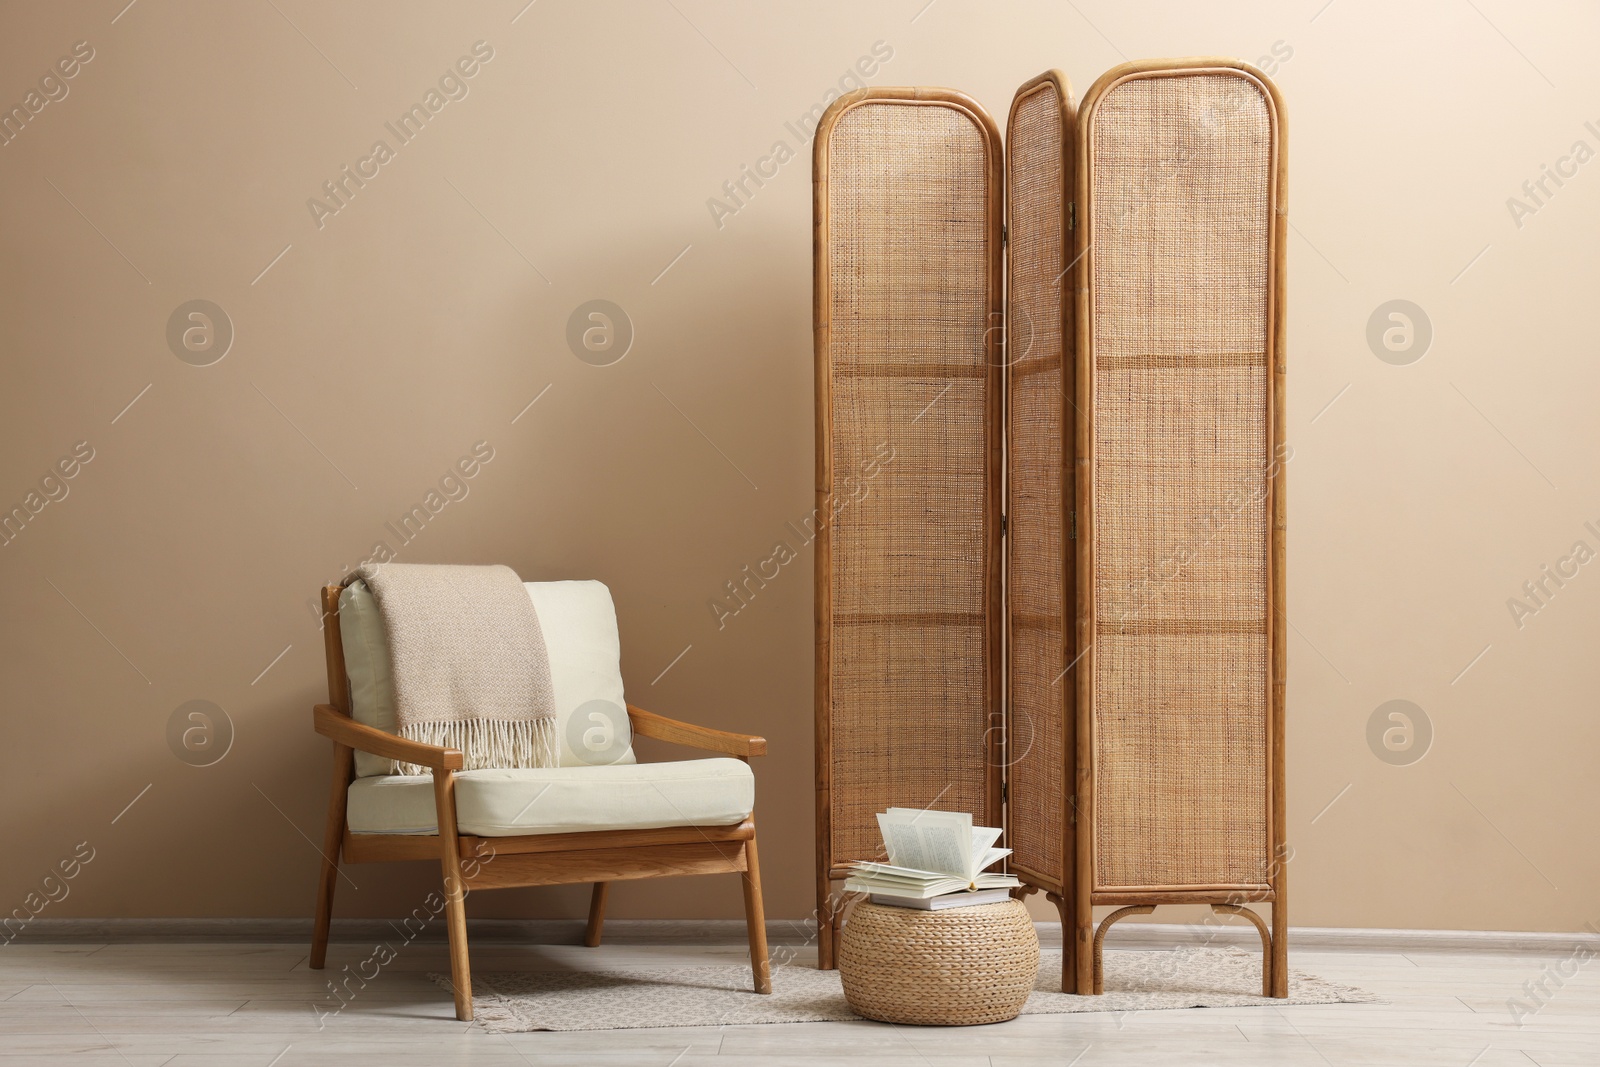 Photo of Folding screen, armchair and blanket near beige wall indoors